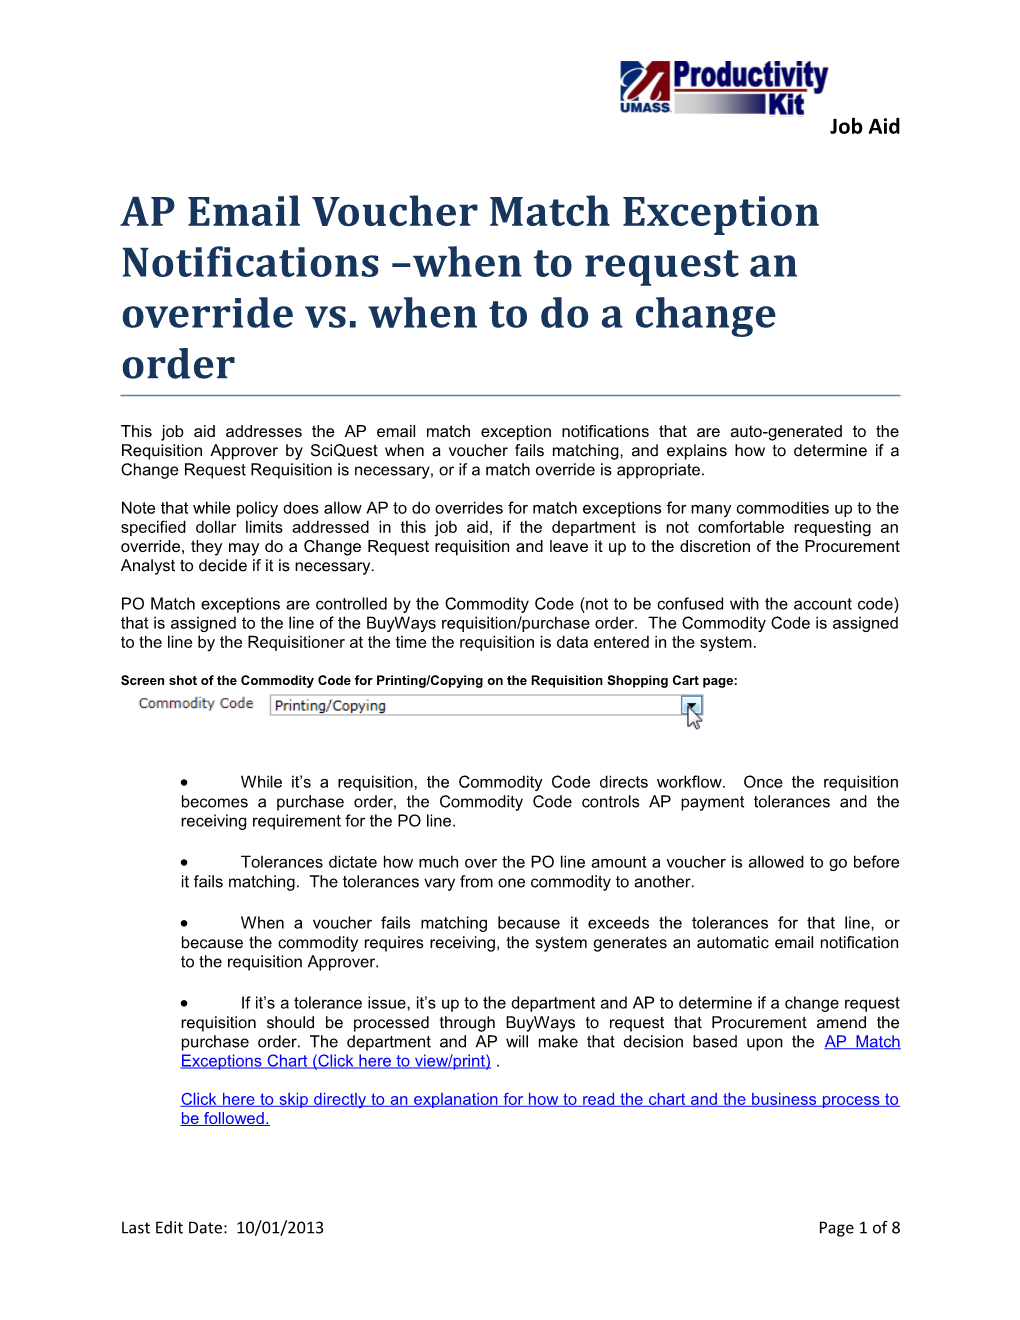 AP Email Voucher Match Exception Notifications When to Request an Override Vs. When To